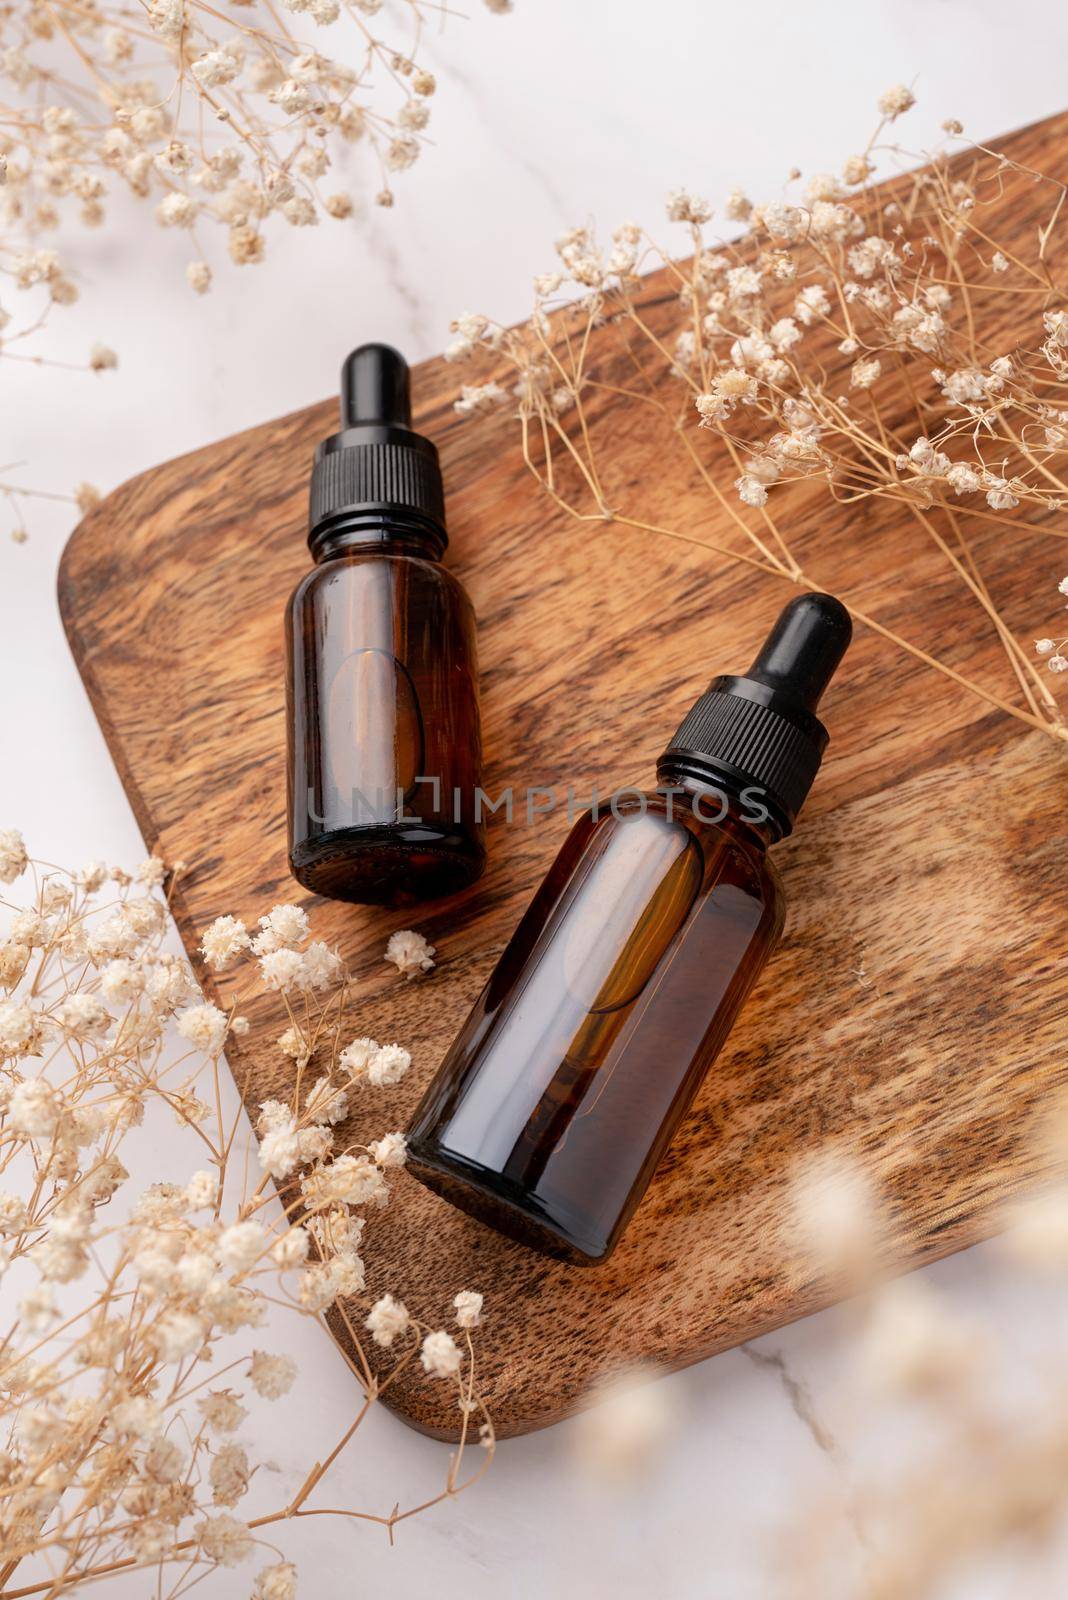 amber glass essential oil dropper bottle with pipette on concrete background with white flowers, mockup design